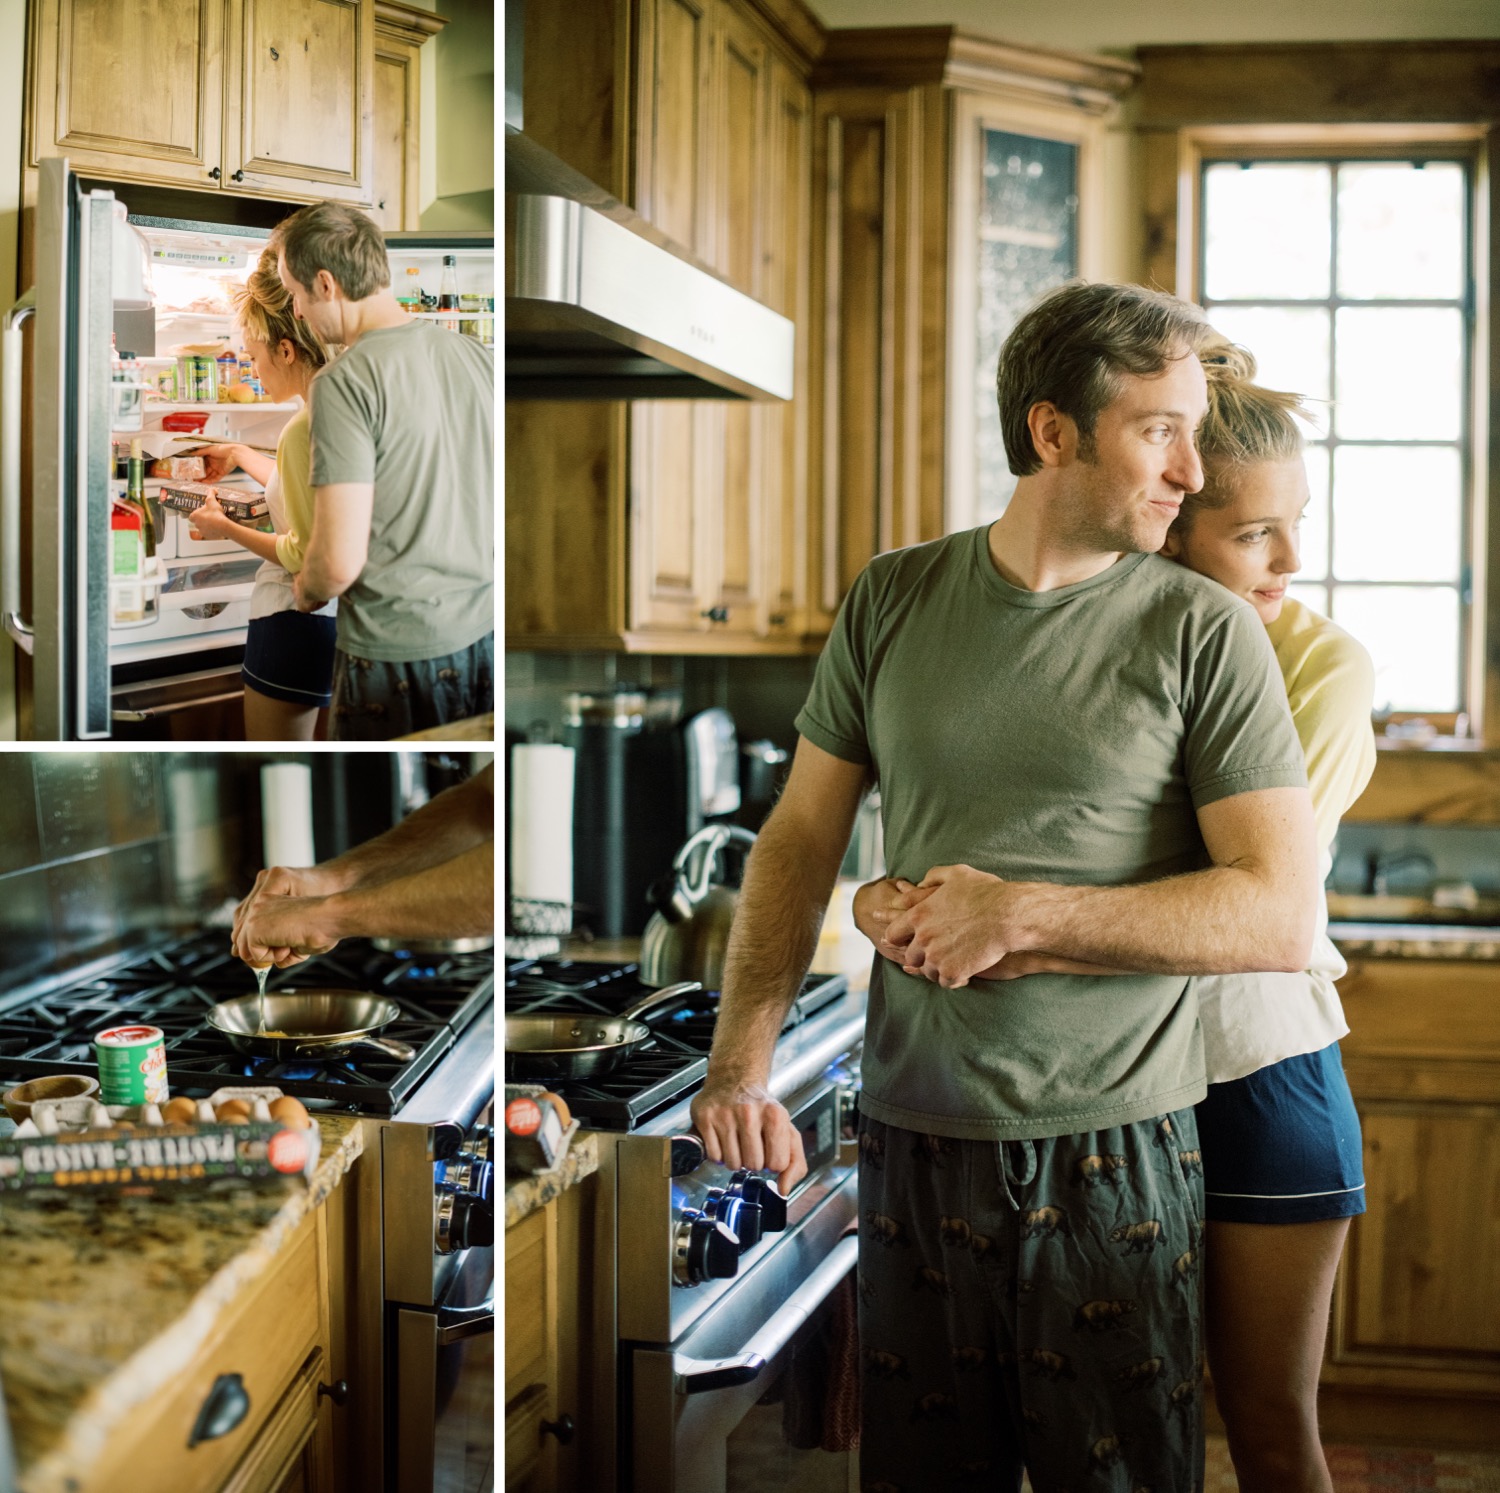 engagement session with dogs, lifestyle engagement session, engagement session cooking breakfast